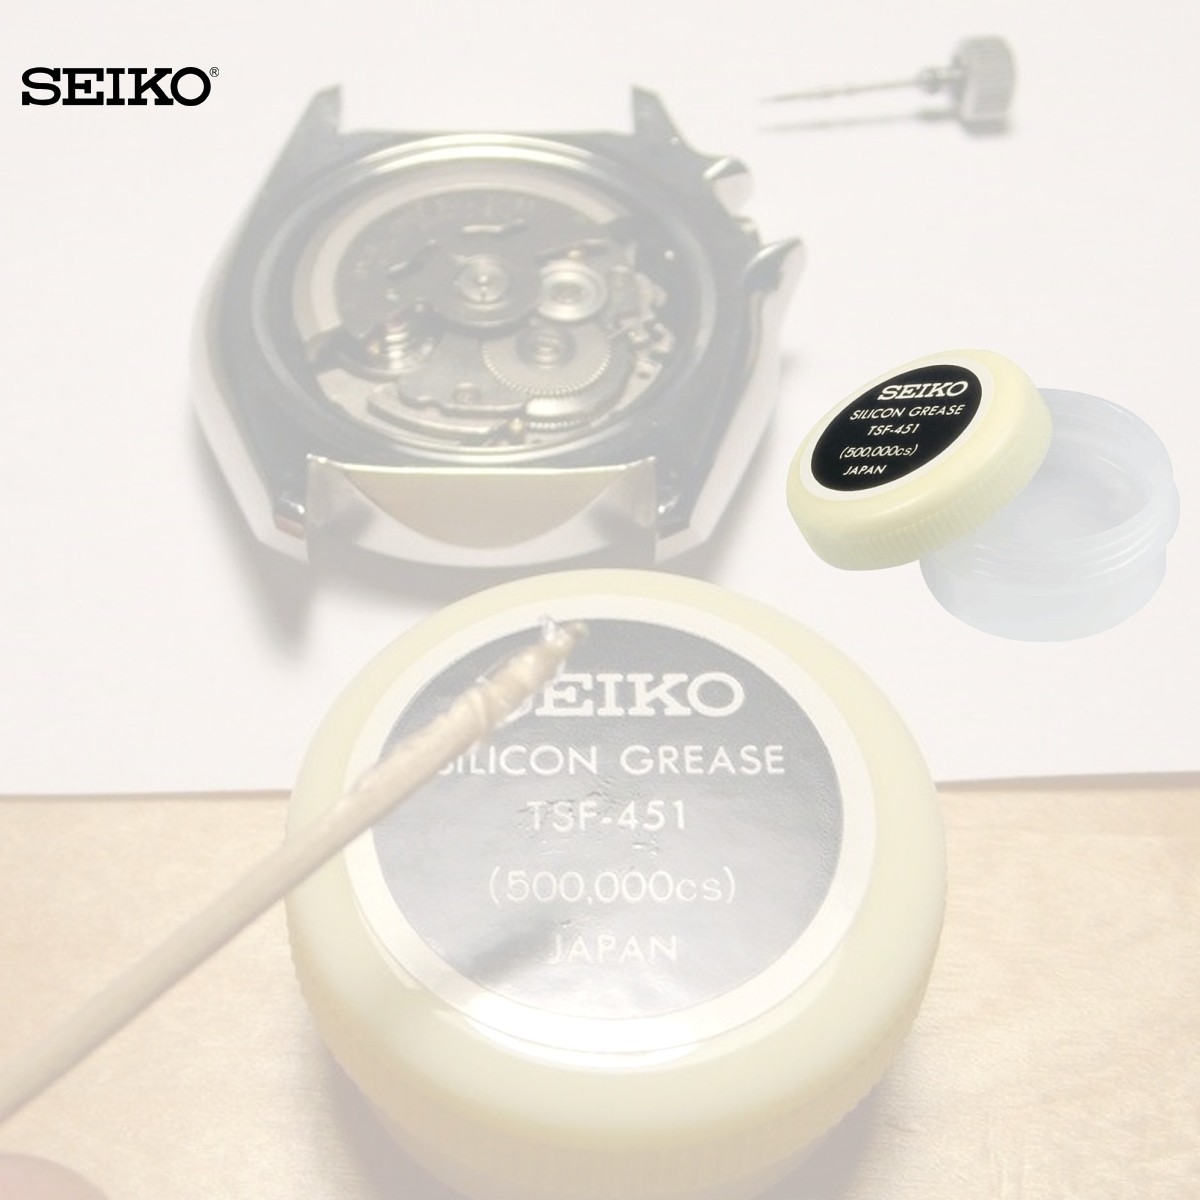 SEIKO Watch TSF-451 Silicon Grease for Waterproof Watch Gaskets